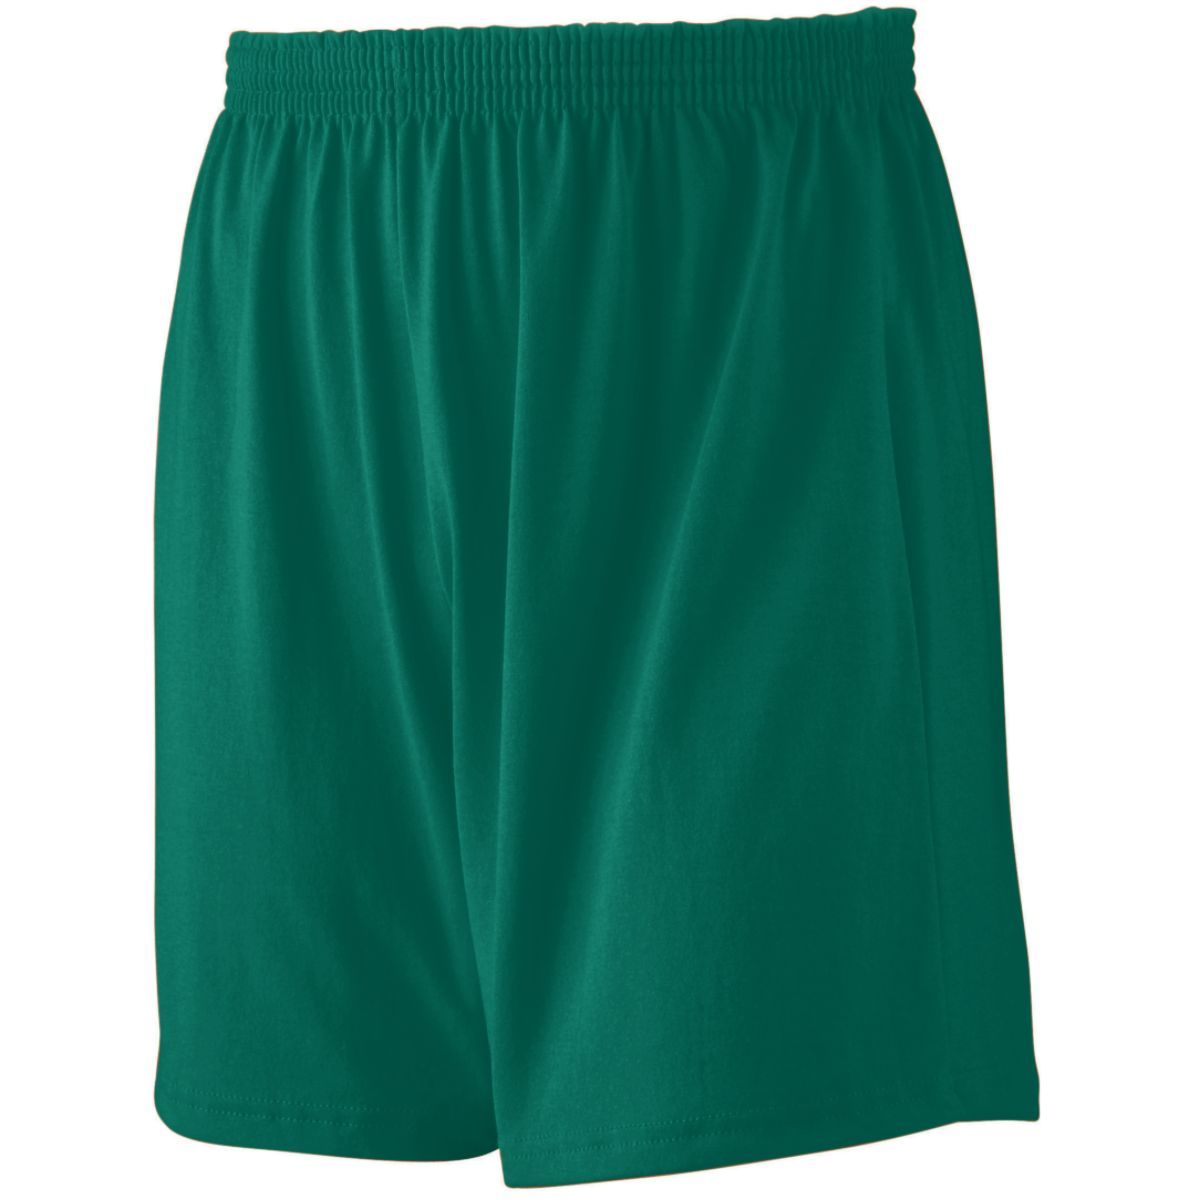 Augusta Sportswear Jersey Knit Shorts in Dark Green  -Part of the Adult, Adult-Shorts, Augusta-Products product lines at KanaleyCreations.com